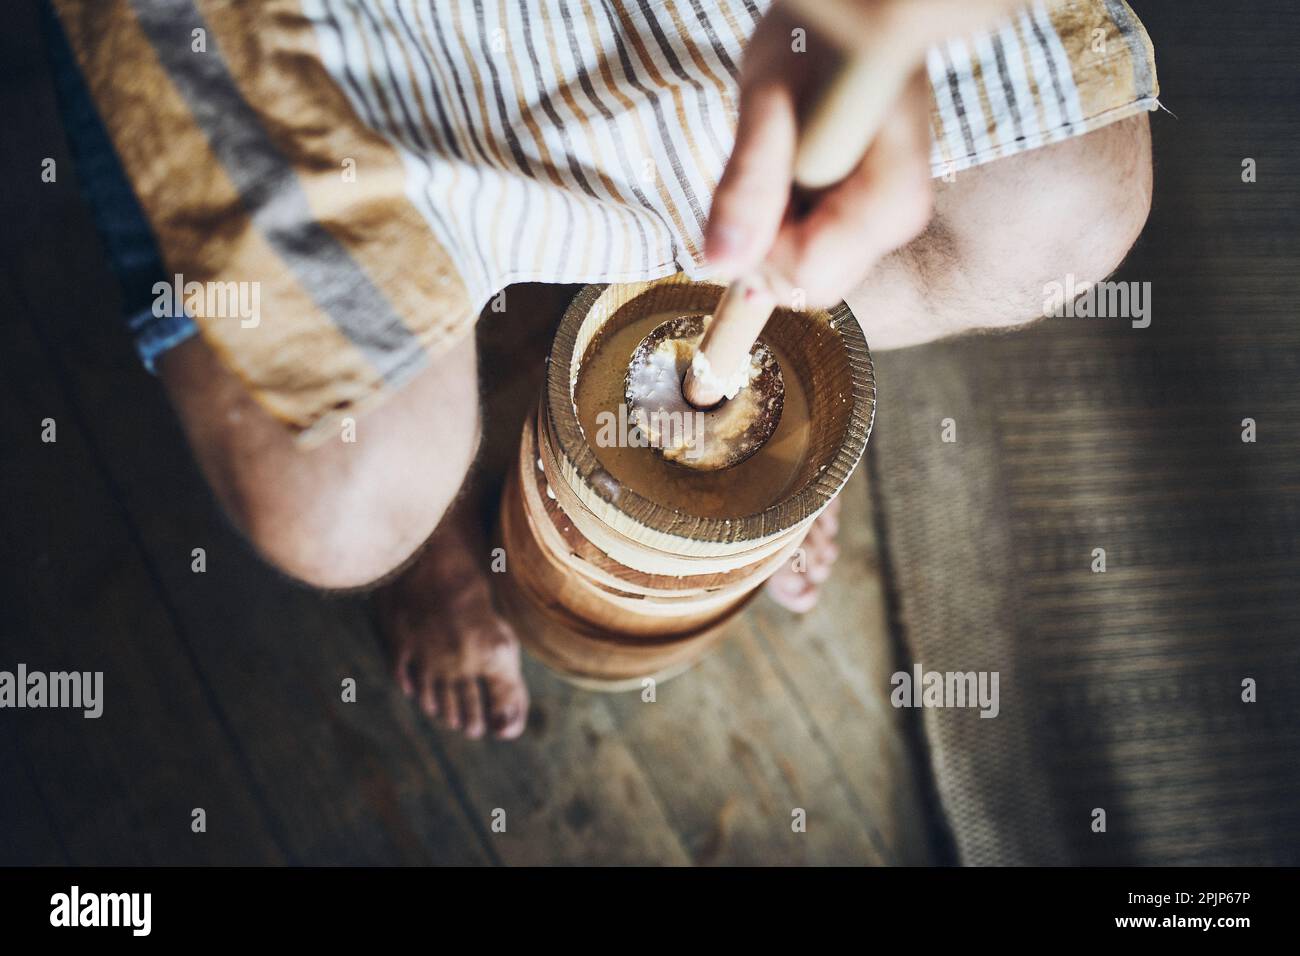 Man making butter with butter churn. Old traditional method making of butter Stock Photo